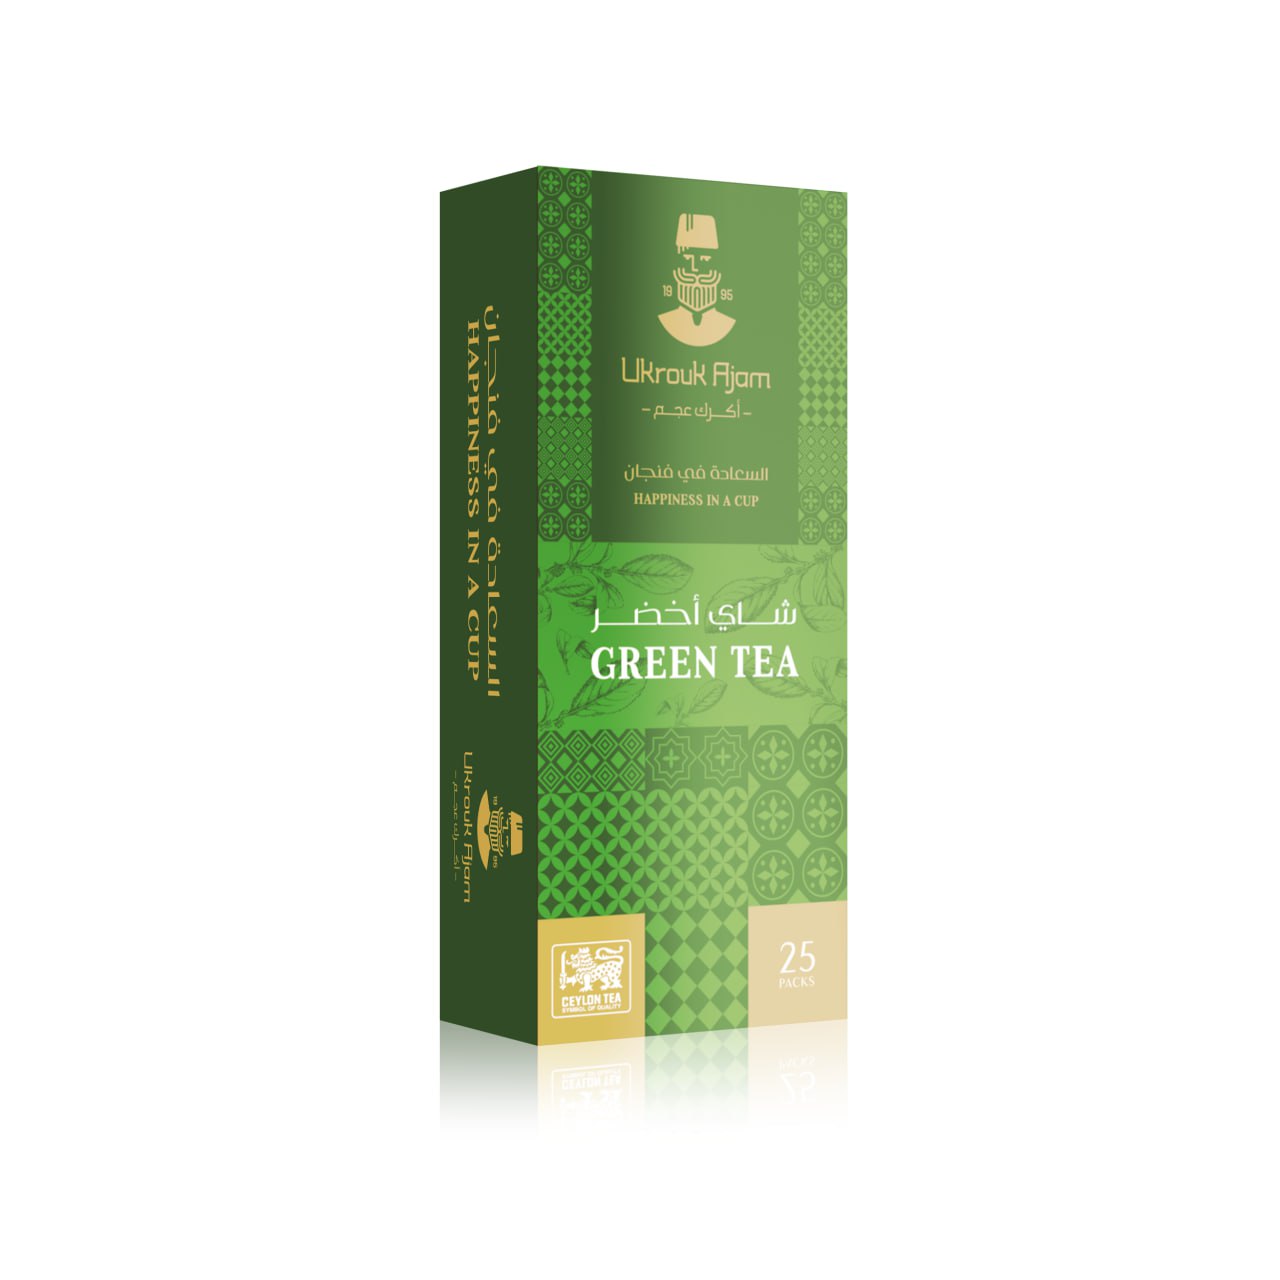 Vibrant green box of Ukrouk Ajam Green Tea containing 25 packs, adorned with traditional patterns and Arabic calligraphy, with the English slogan 'Happiness in a Cup'.